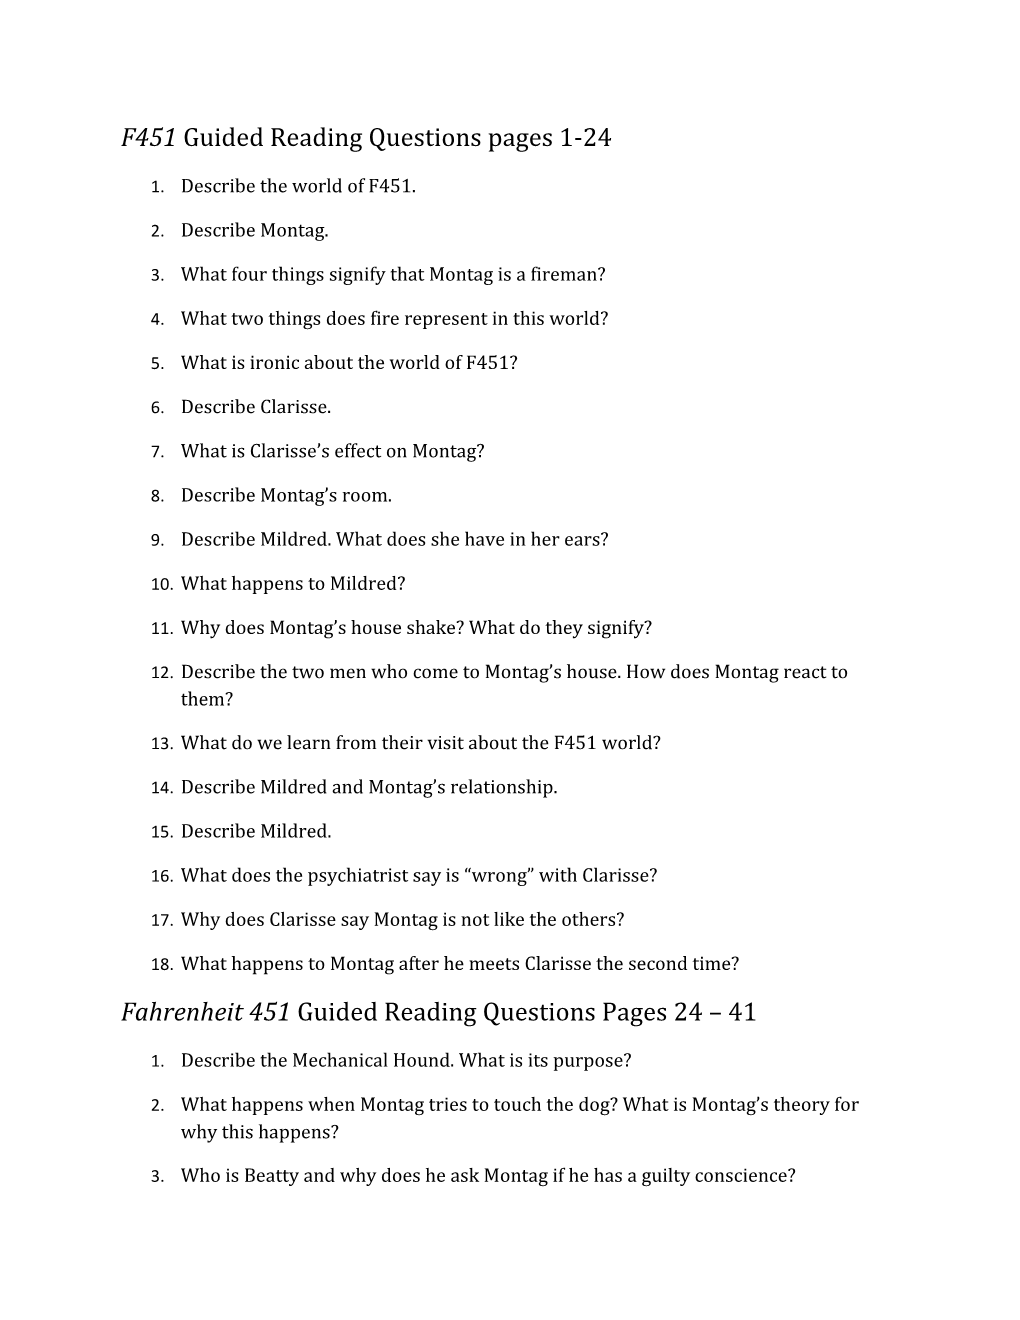 F451 Guided Reading Questions Pages 1-24